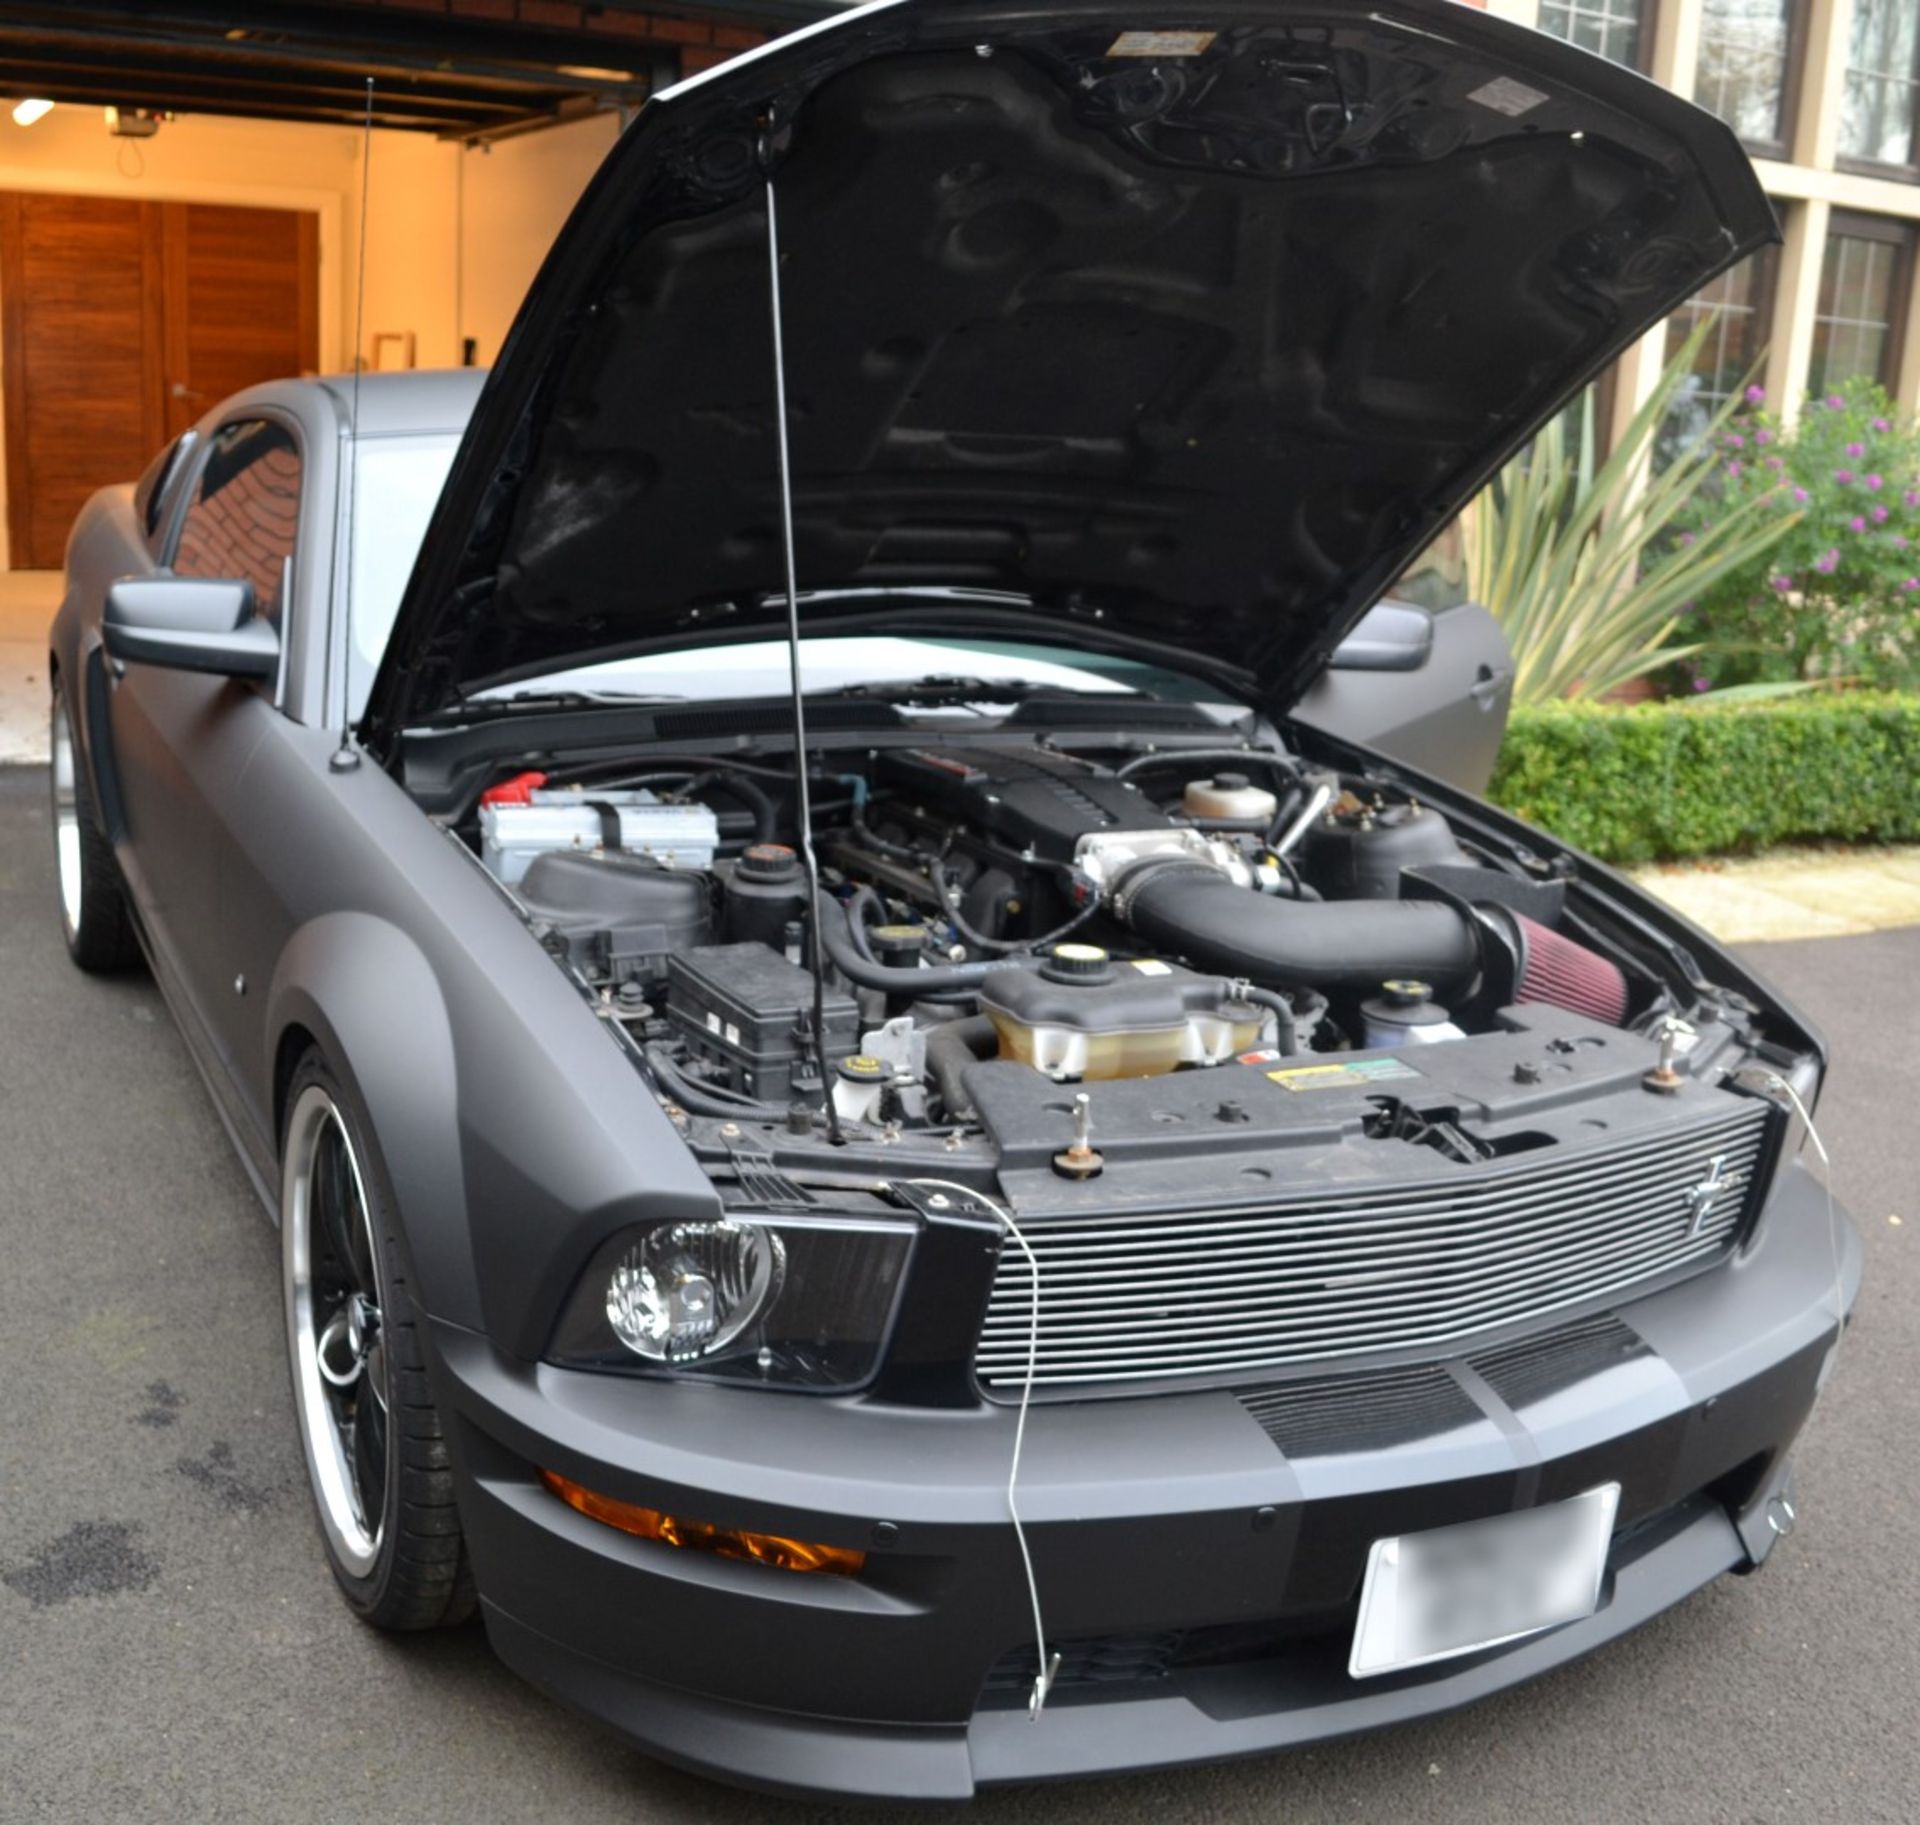 Limited Edition Supercharged 2008 Shelby Ford Mustang GT-C - 2136 Miles - No VAT on the hammer - Image 64 of 64